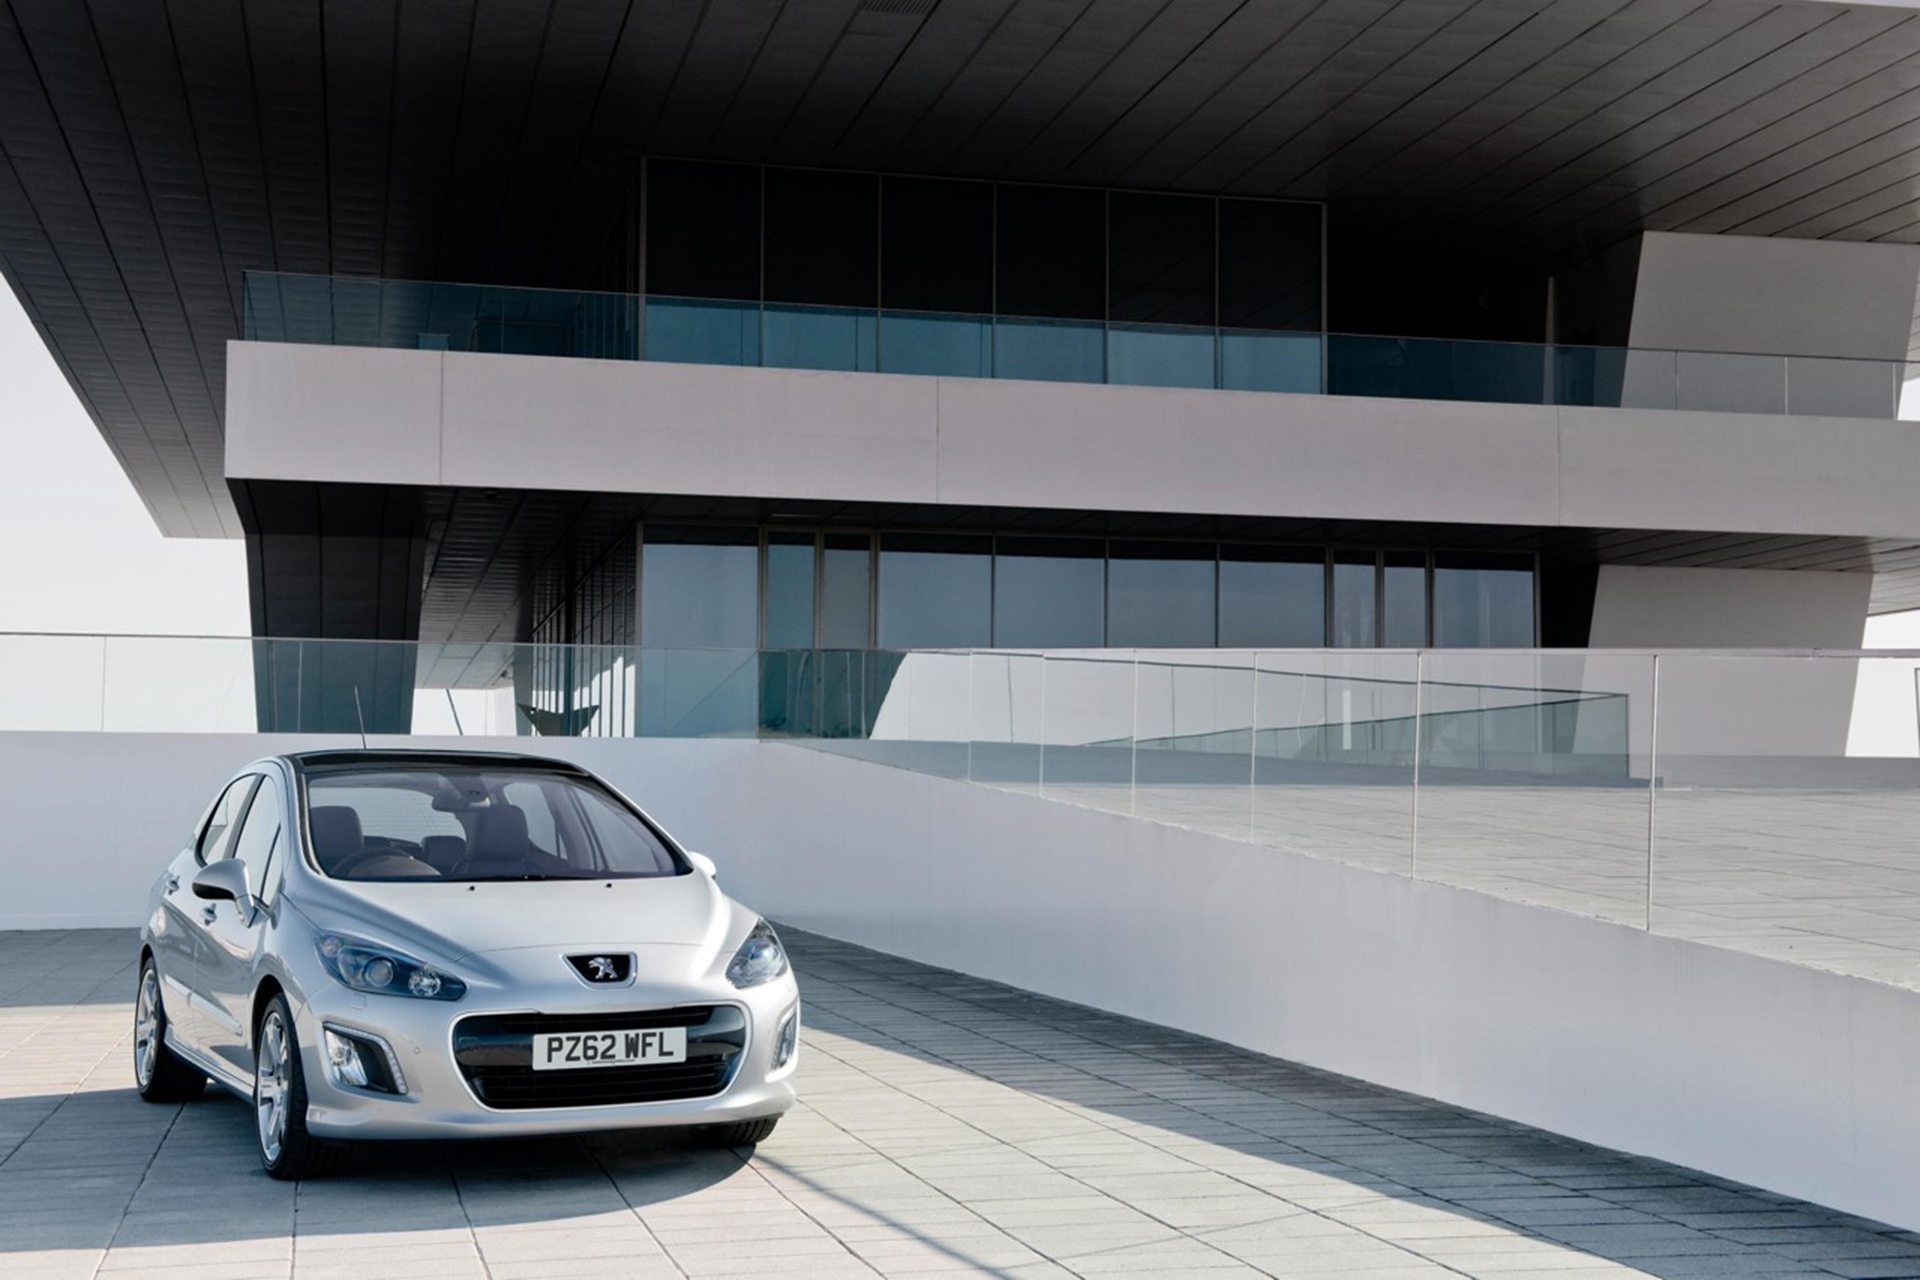 PEUGEOT SHINES IN SEPTEMBER WITH A FULL CHOICE OF COMPETITIVE NEW PRODUCTS AND OFFERS